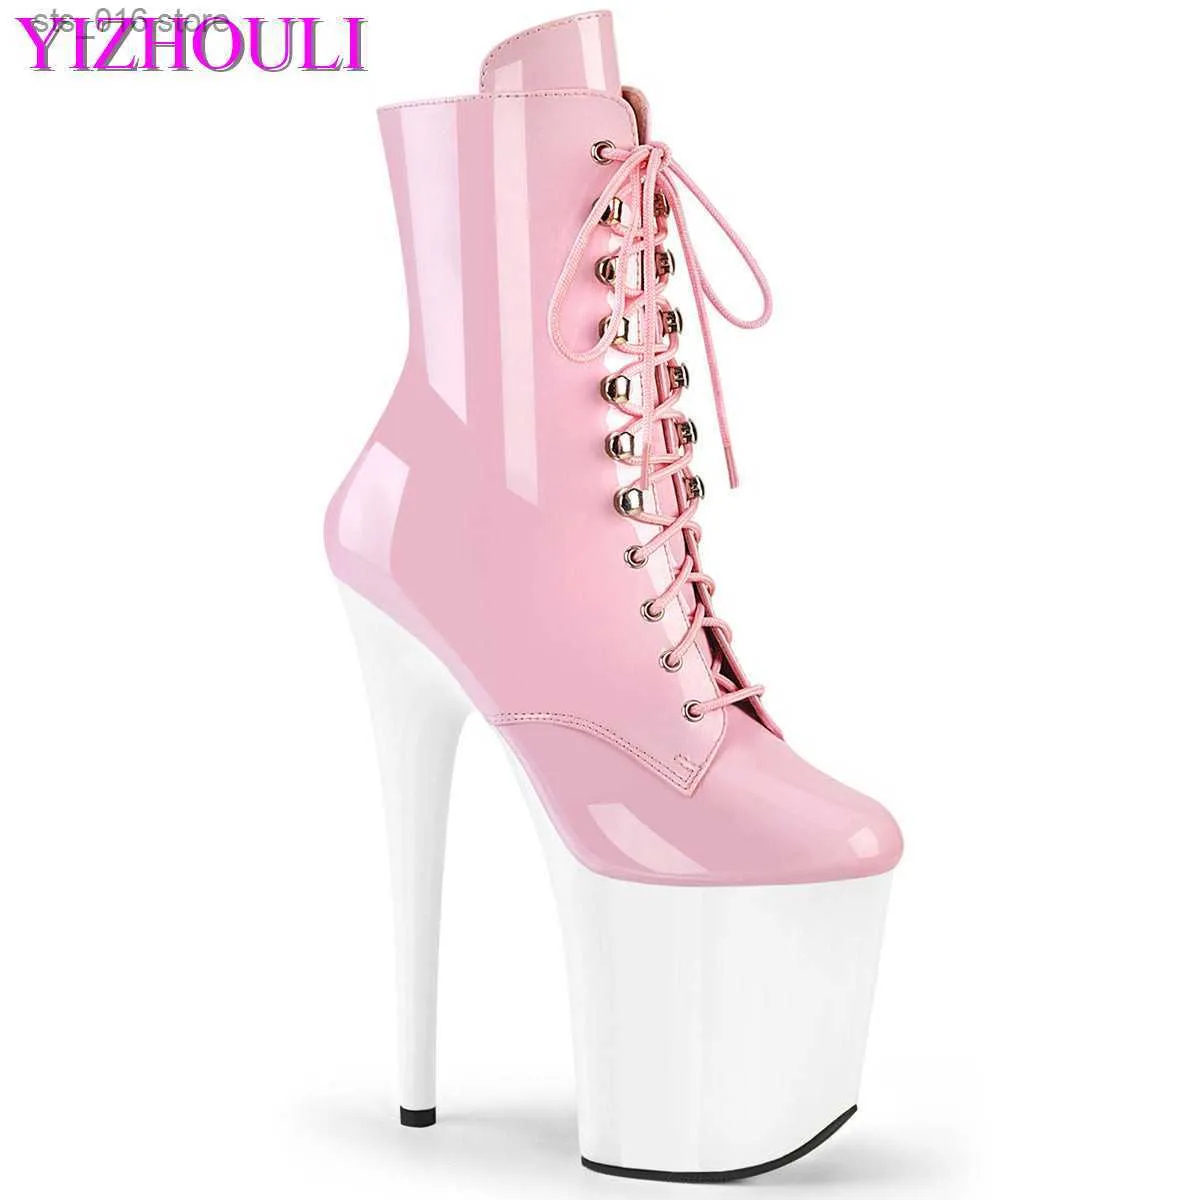 Knight Inch Heel Fashion High 8 Female Sexy Platform Ankle for Women Autumn Winter Shoes 20-23cm Pink Pole Dancing Boots T230824 569 T23024